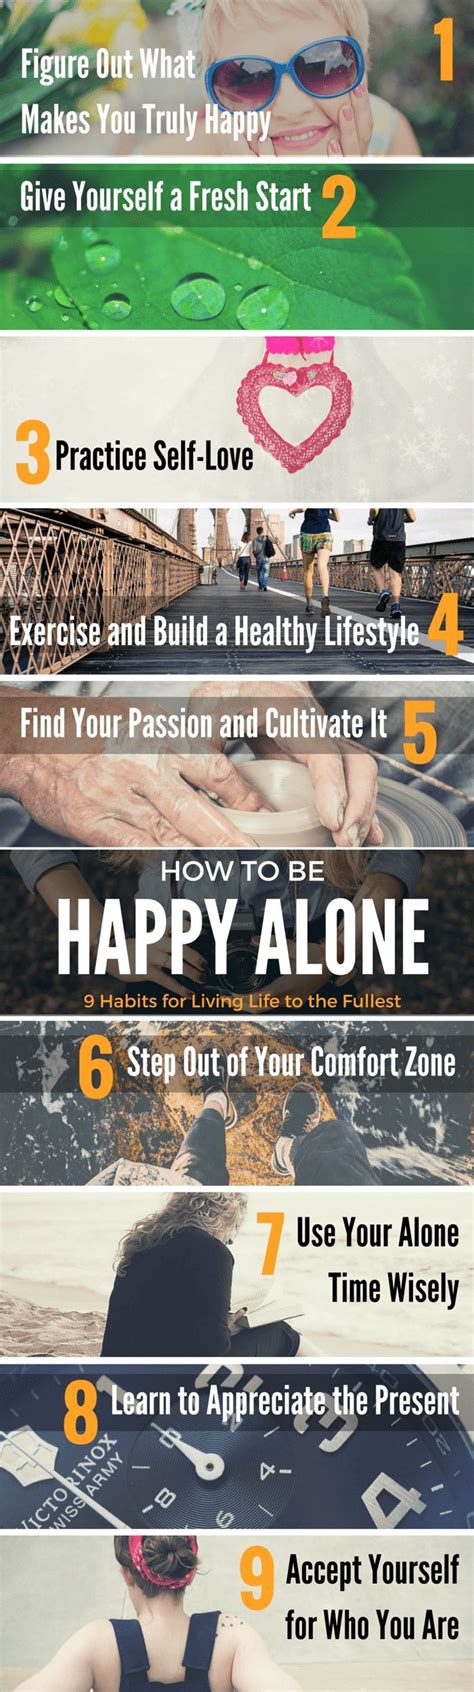 Being happy alone is good, but is happiness real if not shared with others? 9 Tips on How to Be Happy (and Live) Alone | Happy alone, Happy alone quotes, Single, happy